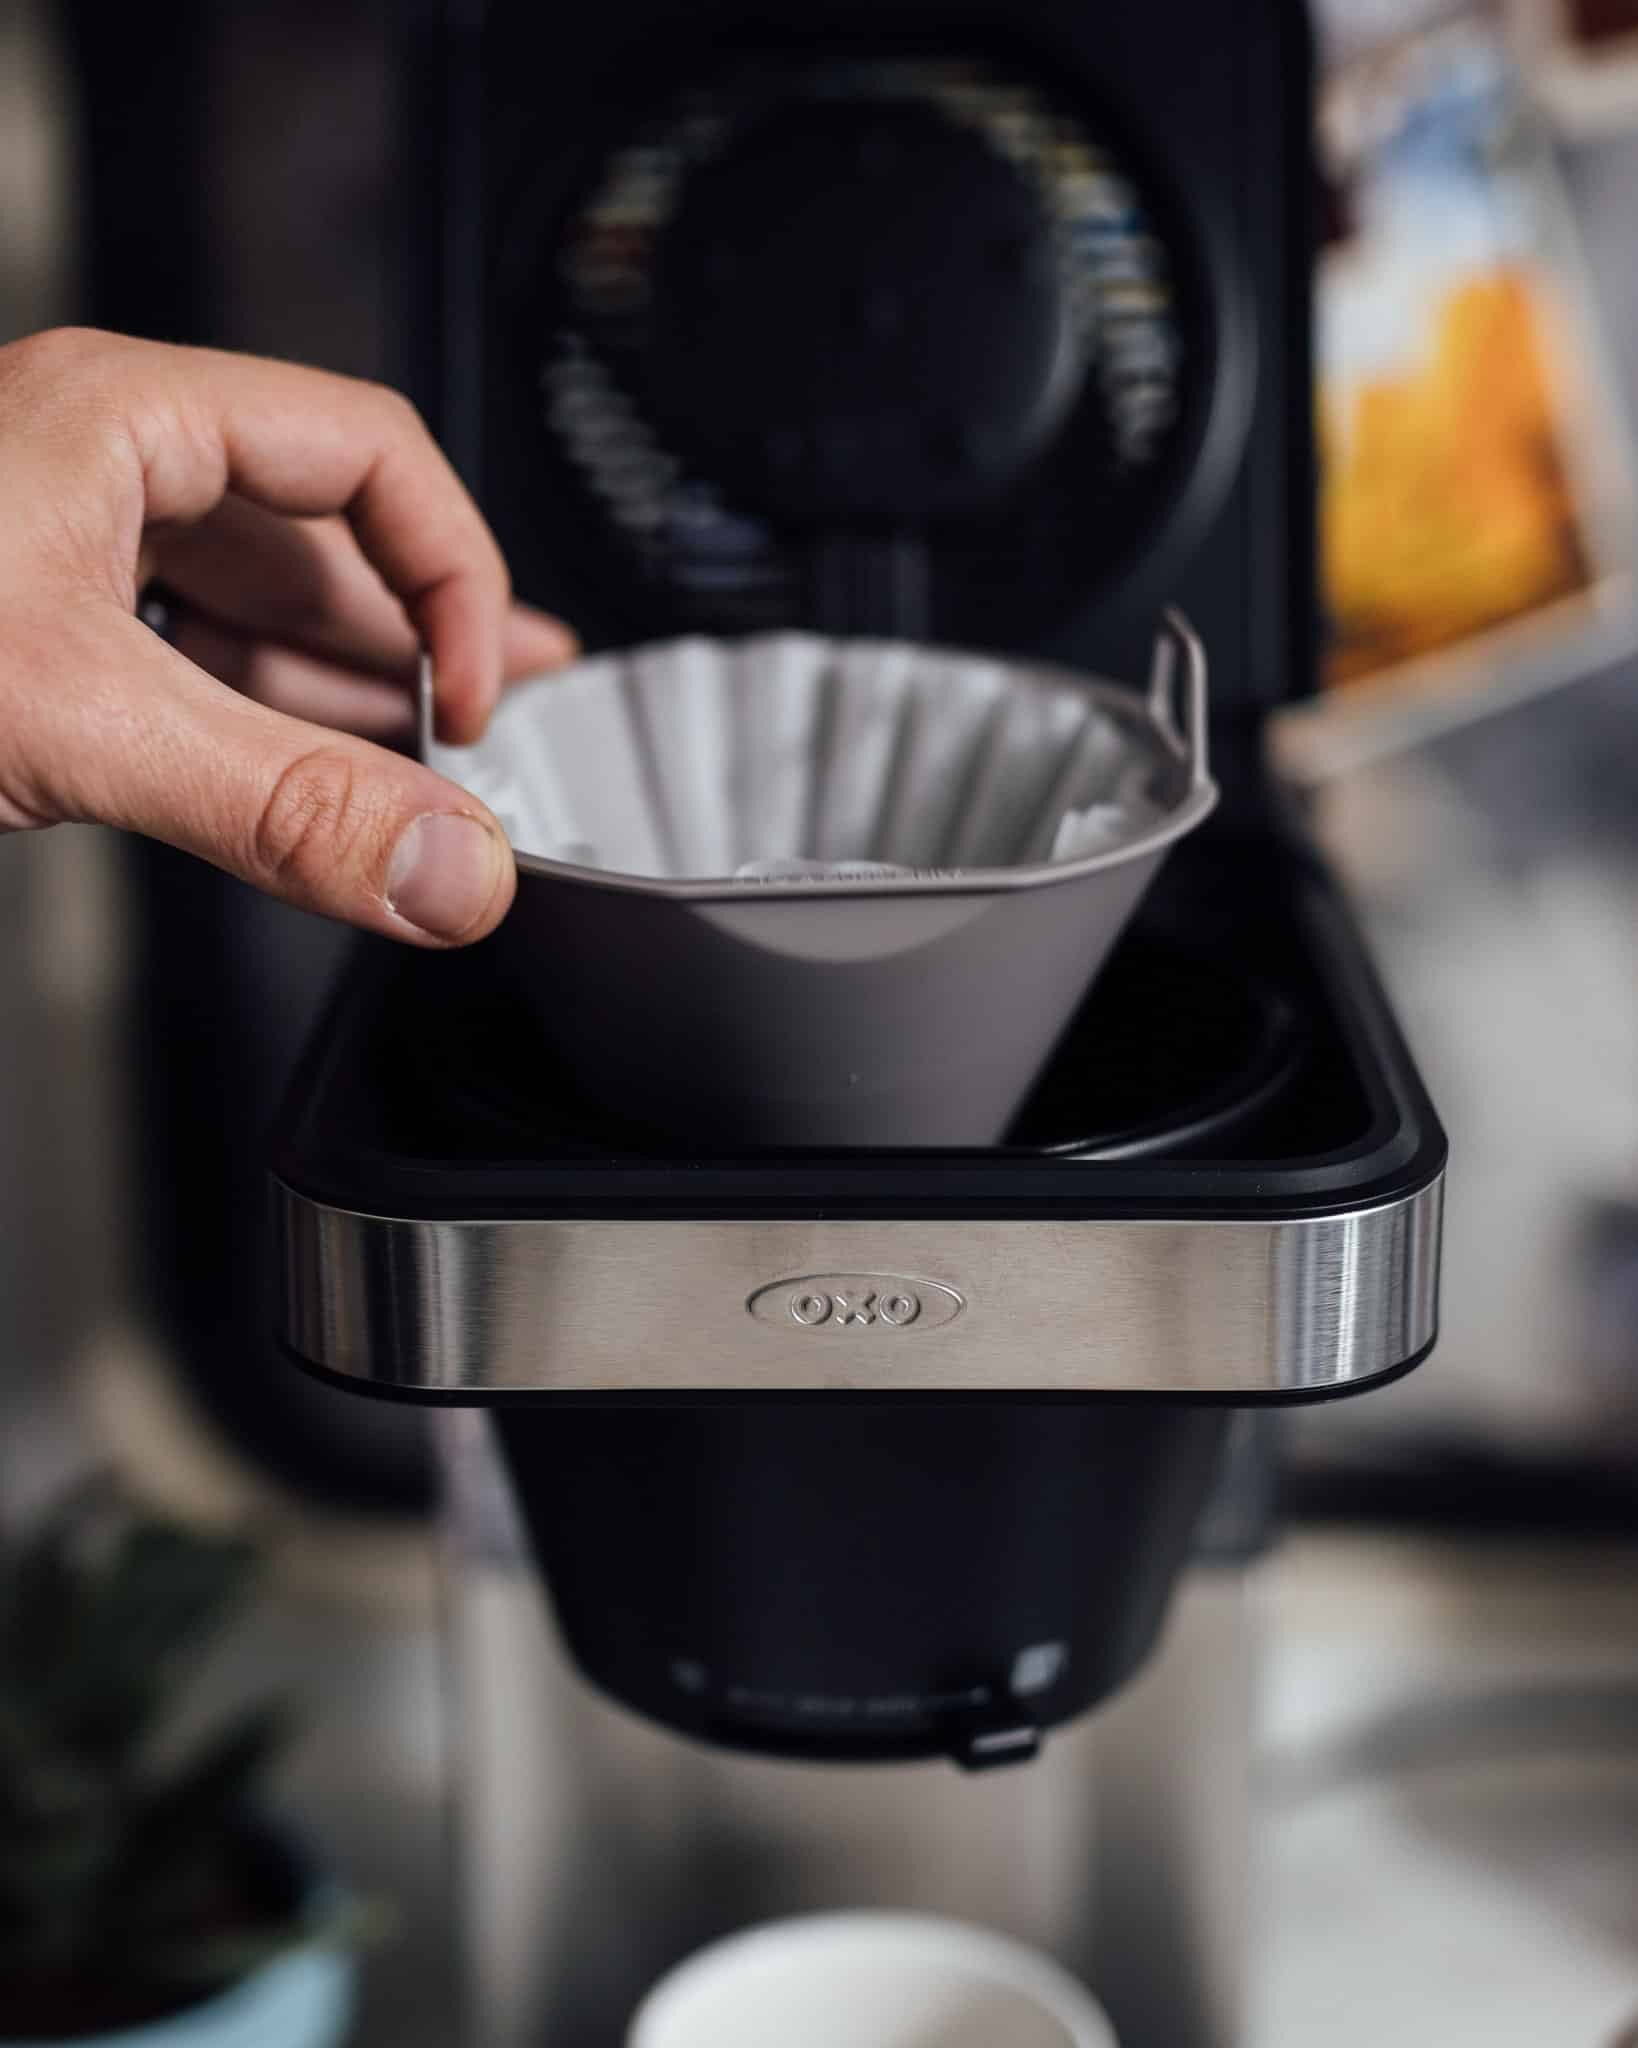 Oxo 8-Cup Coffee Maker Review: a Keurig Killer